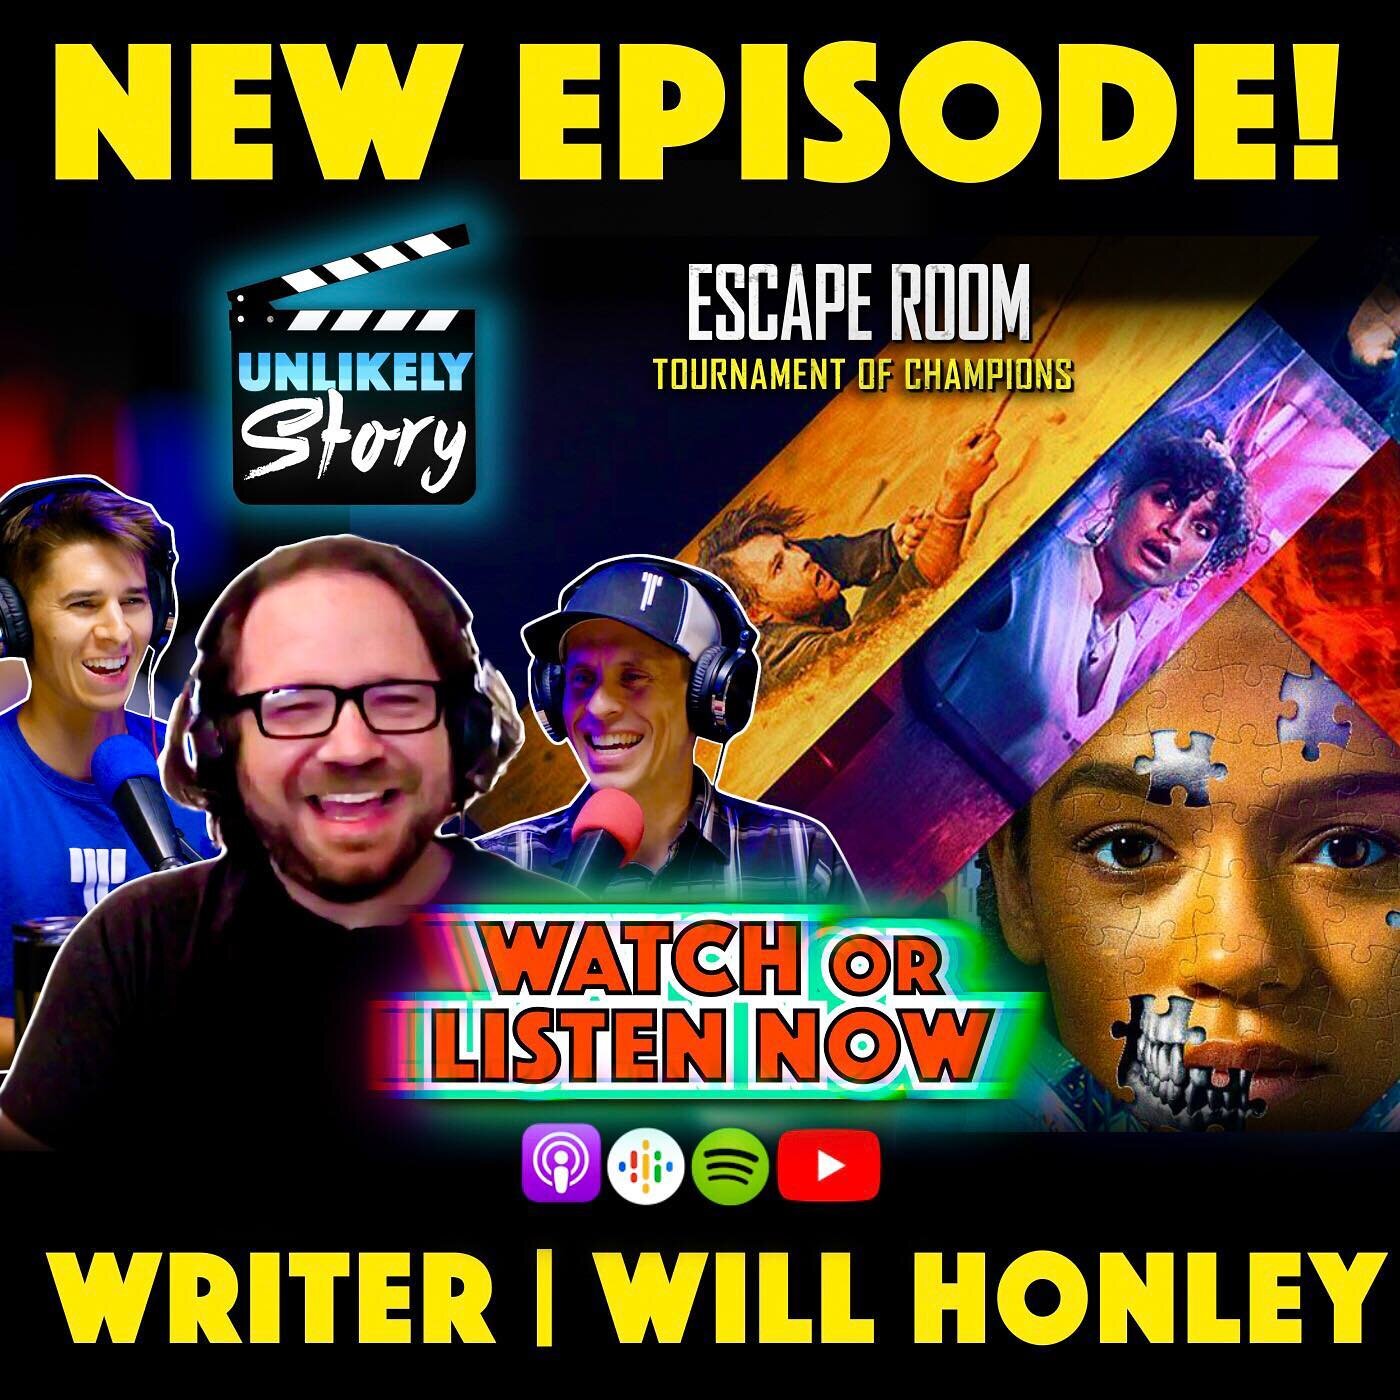 LIVE NOW! 👀🎙 *Links in Bio* Check out our chat with @escaperoom 2 #writer Will Honley! #tournamentofchampions is in theaters now! 
.
.
.
.
.

#filmmaking #film #filmmaker #director #bts #behindthescenes #makingof #setlife #camera #filmmakersonlyblo